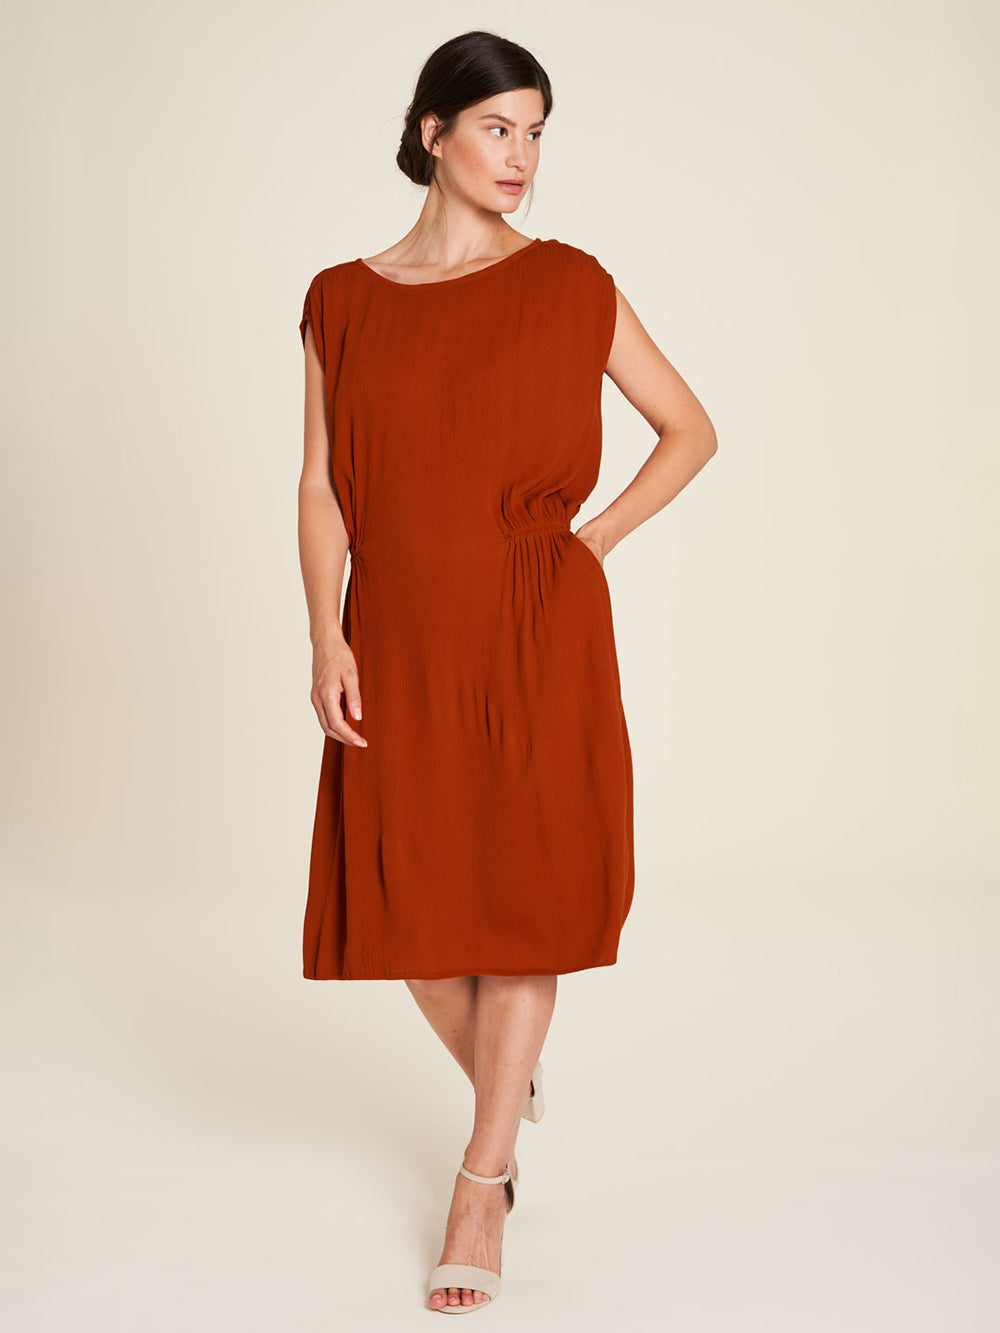 Tranquillo - EcoVero™ Kleid red earth